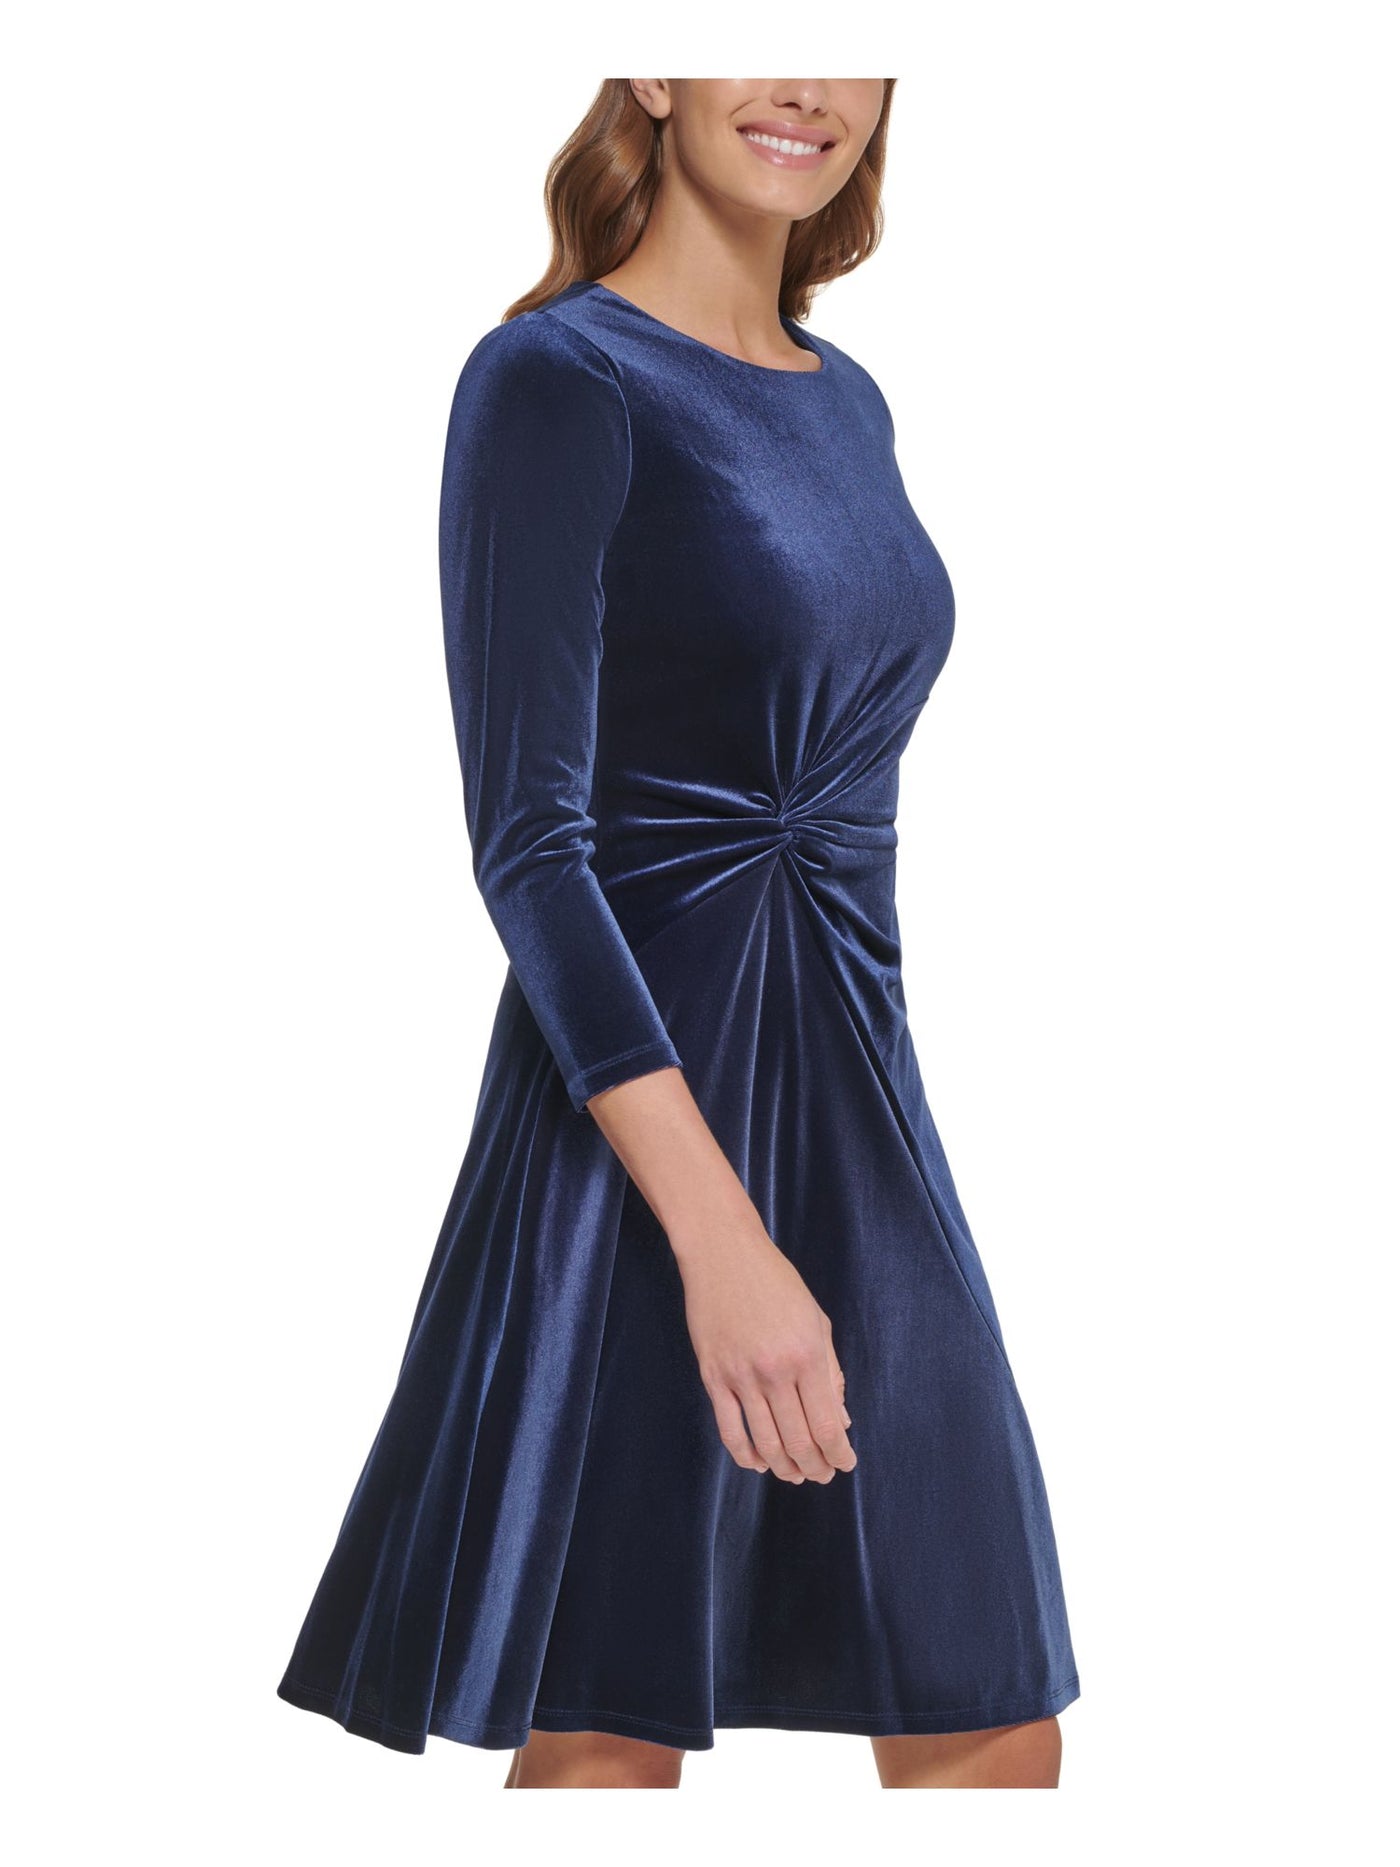 DKNY Womens Blue Stretch Zippered Twist Front Velvet 3/4 Sleeve Jewel Neck Above The Knee Party Fit + Flare Dress 16